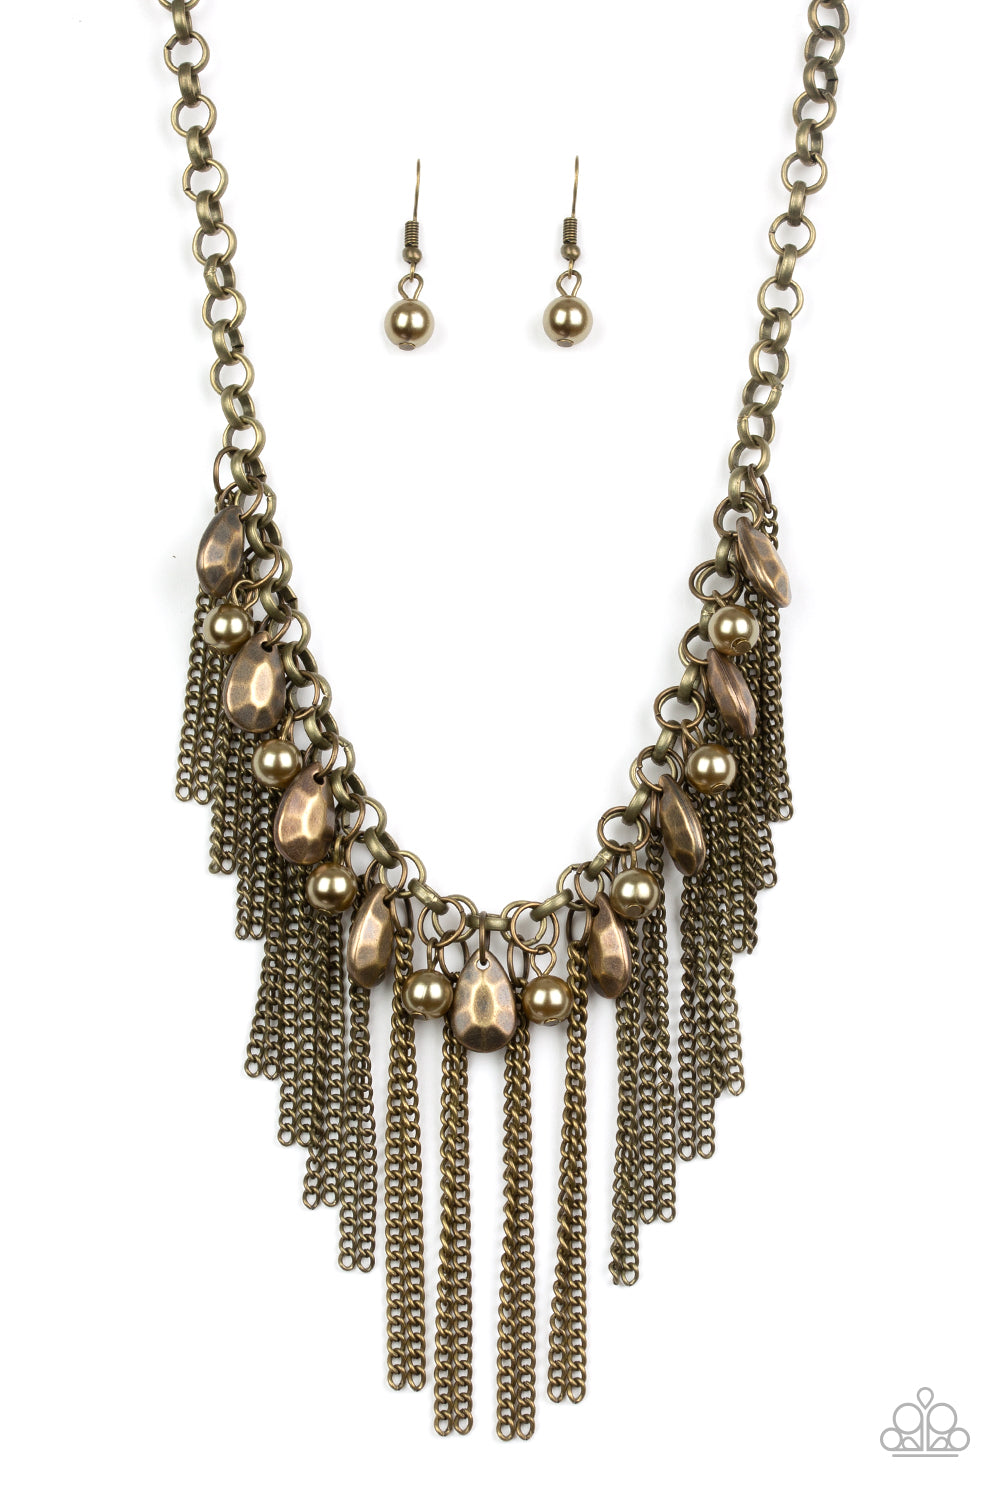 ndustrial Intensity Brass Necklace - Paparazzi Accessories - A collection of faceted brass teardrops and pearly brass beads drip from the bottom of an antiqued brass chain. Pairs of brass chains stream from the bottom of the chain, creating an intensely tapered fringe below the collar. Features an adjustable clasp closure. Sold as one individual necklace.